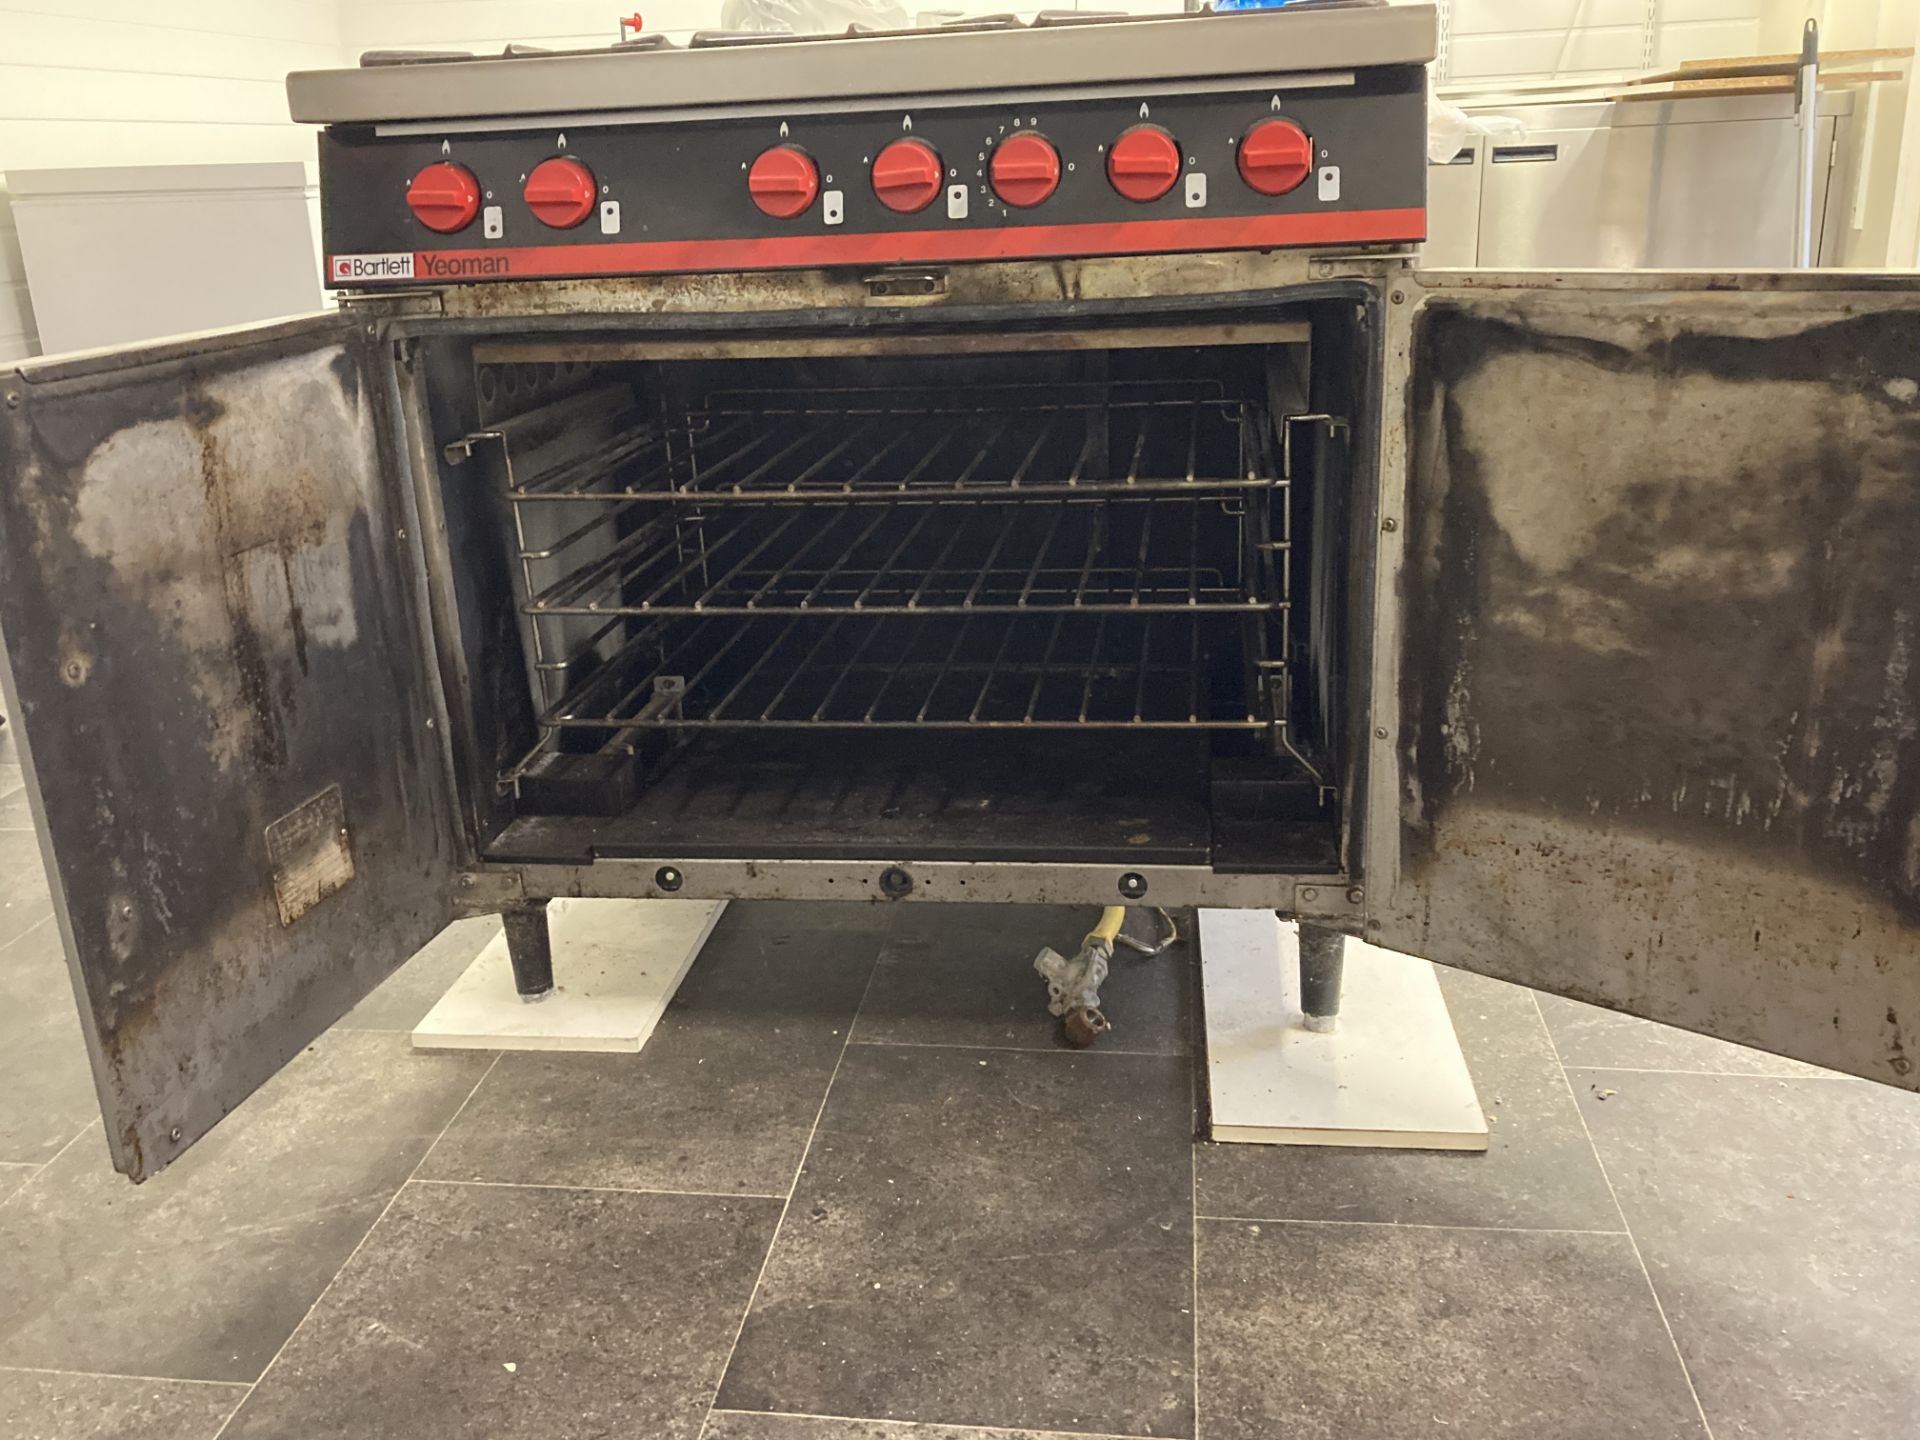 Bartlett Yeoman 6 Ring Burner and Gas Oven - Image 2 of 4